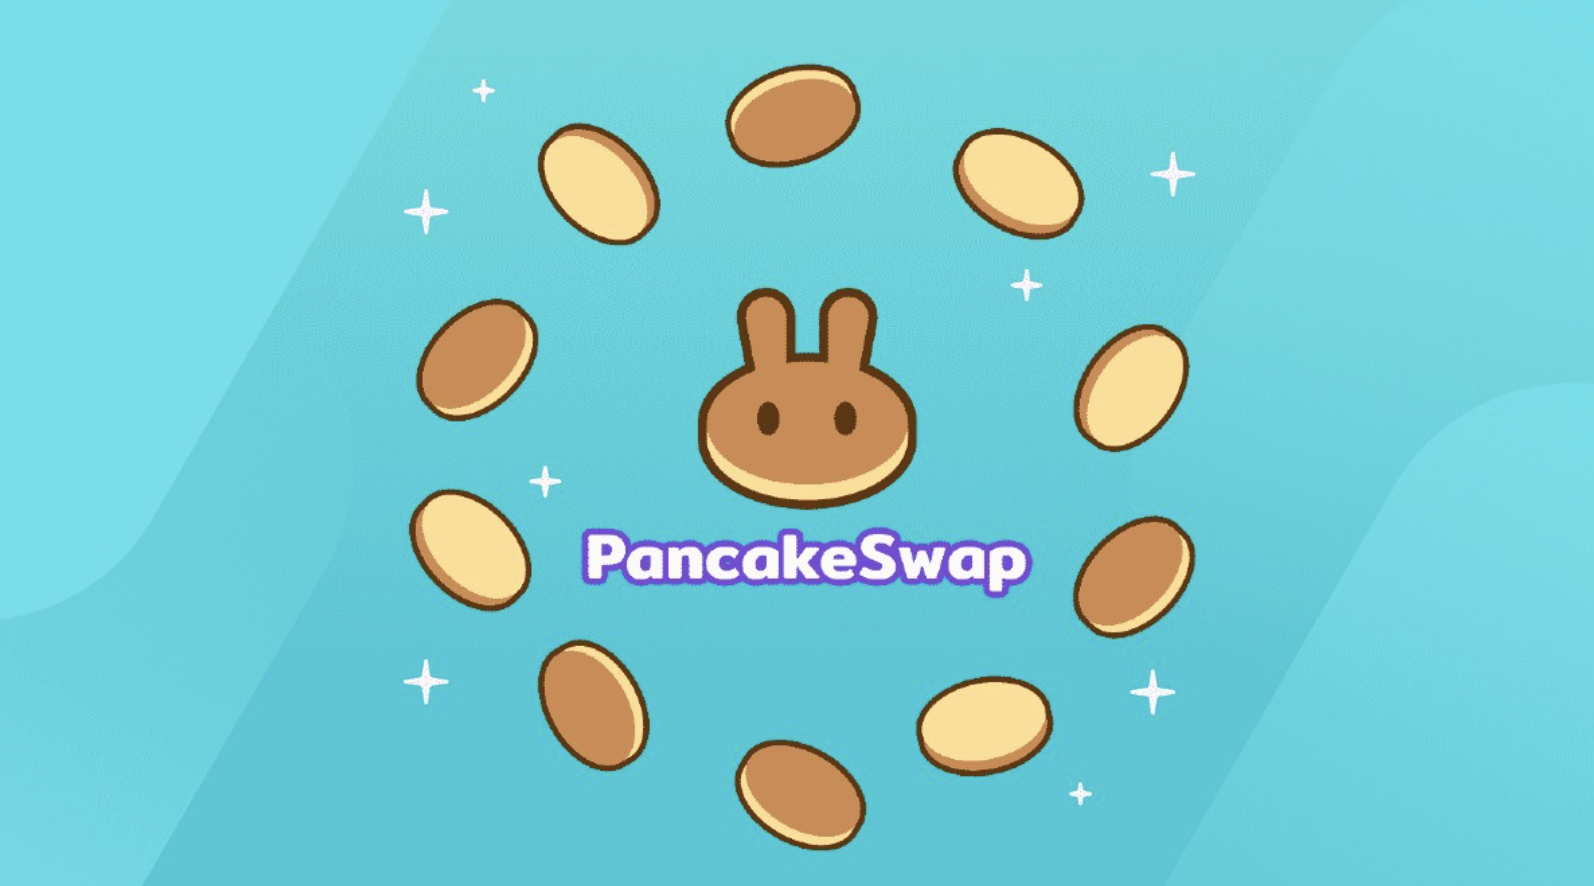 How to Buy PancakeSwap Coin?